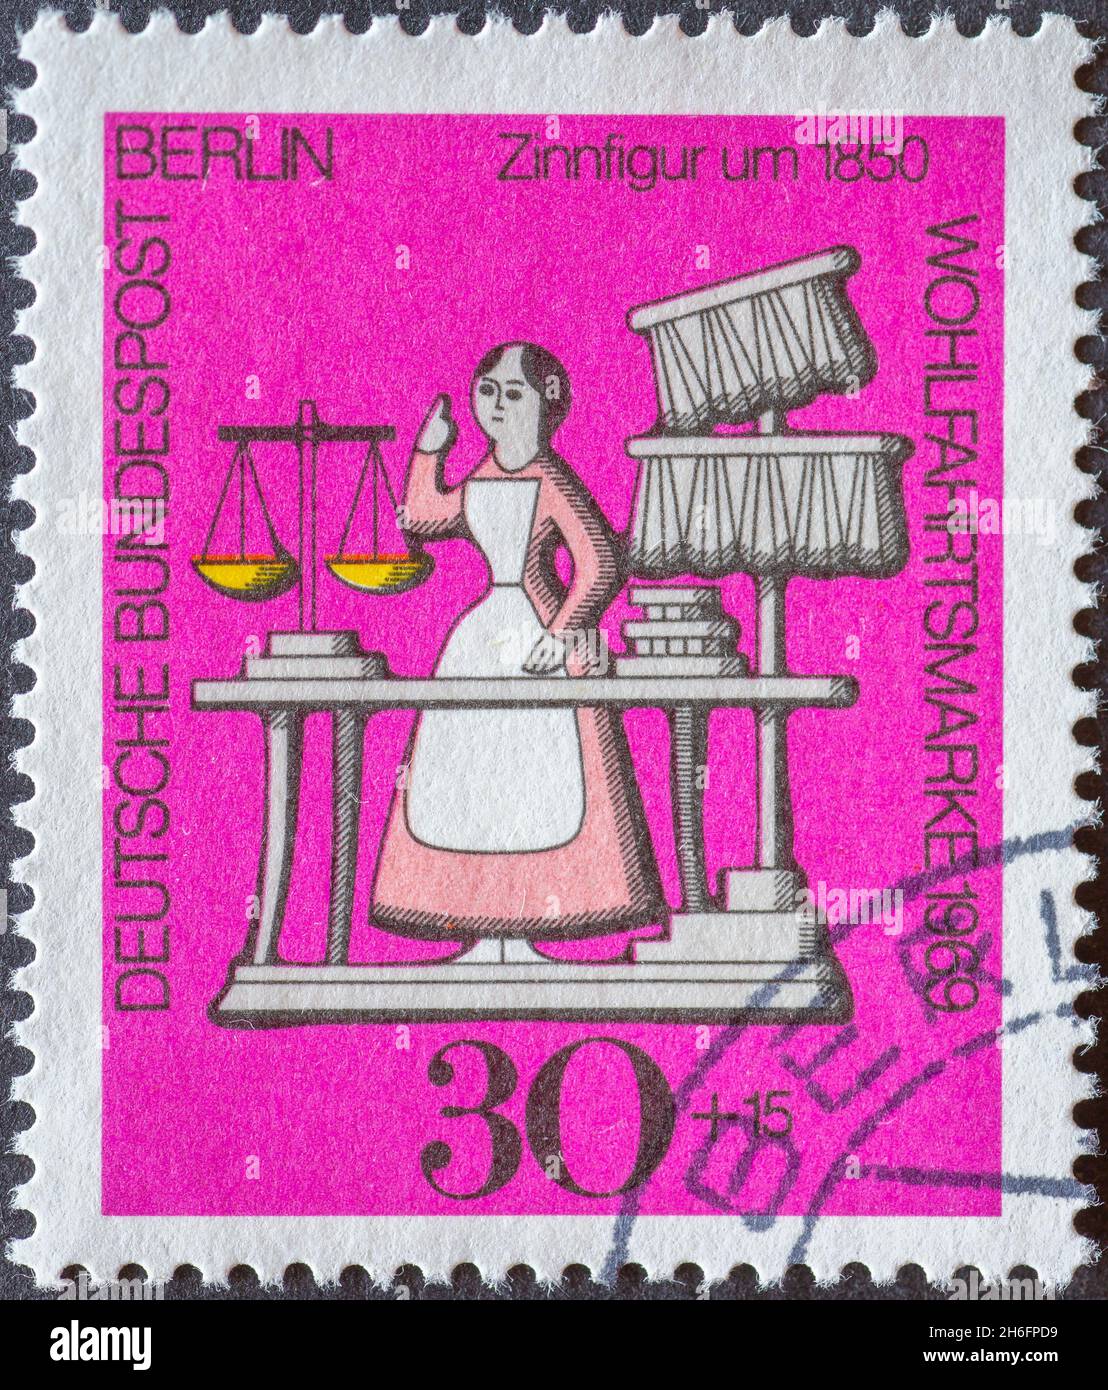 GERMANY, Berlin - CIRCA 1969: a postage stamp from Germany, Berlin showing a charity postal stamp from 1969 with a saleswoman in an antique shop as a Stock Photo